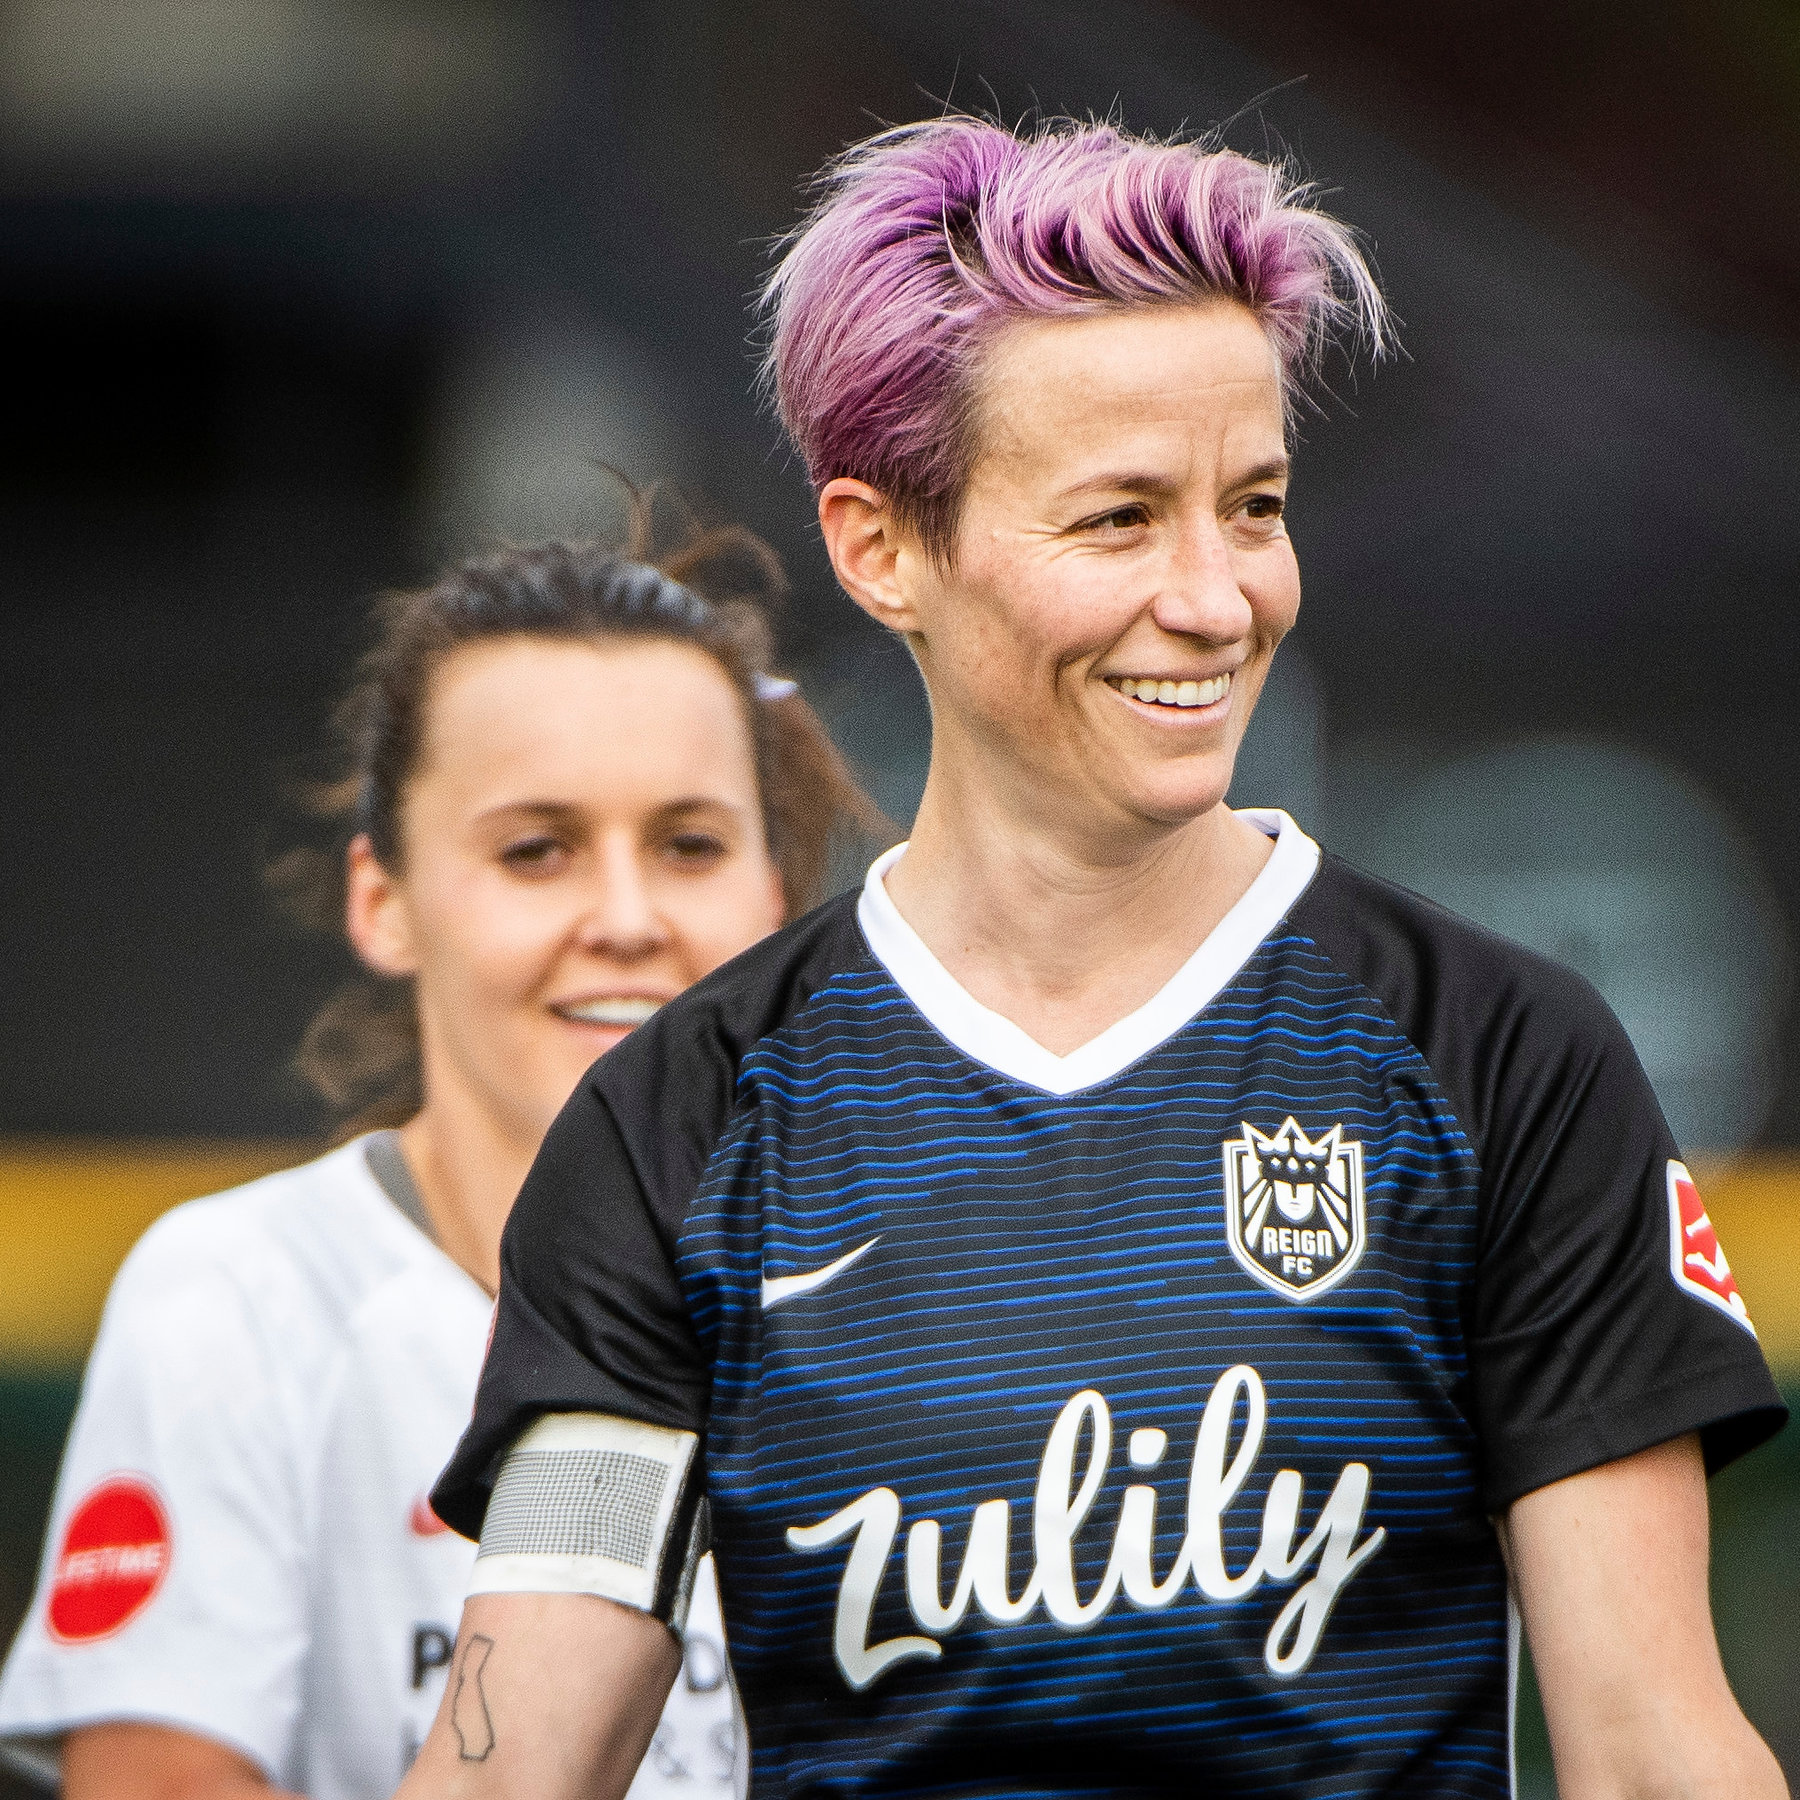 Which country did Megan Rapinoe win the FIFA Women's World Cup with in 2019?